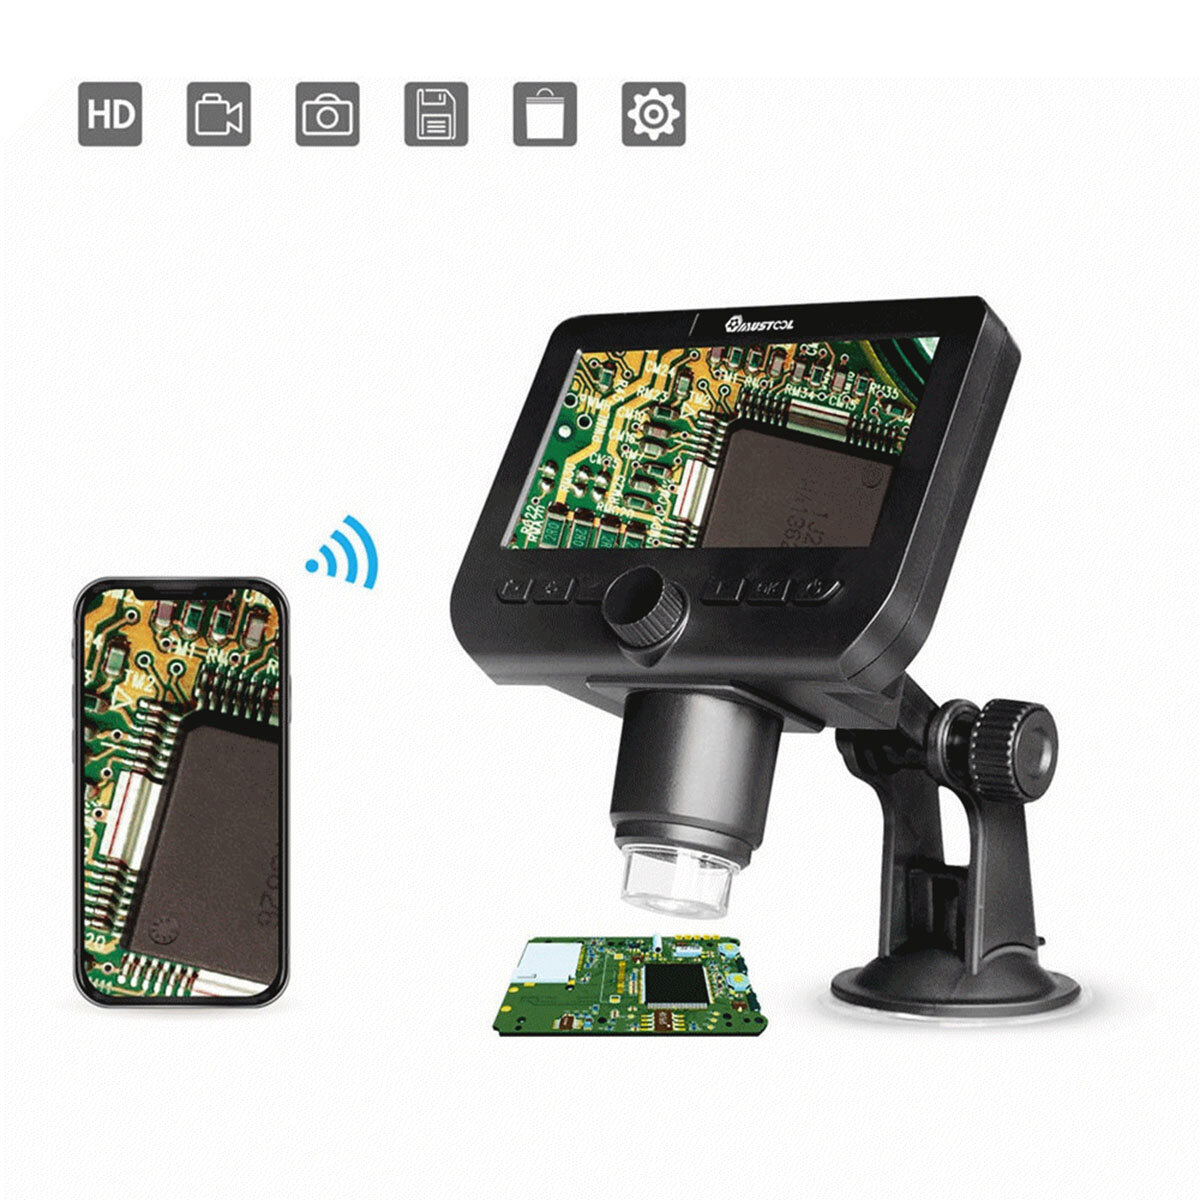 MUSTOOL G610 2MP 4.3－Inch LCD Wifi Microscope Support IOS Android System Built－in Rechargeable Battery ＆ 8 Adjustable Leds